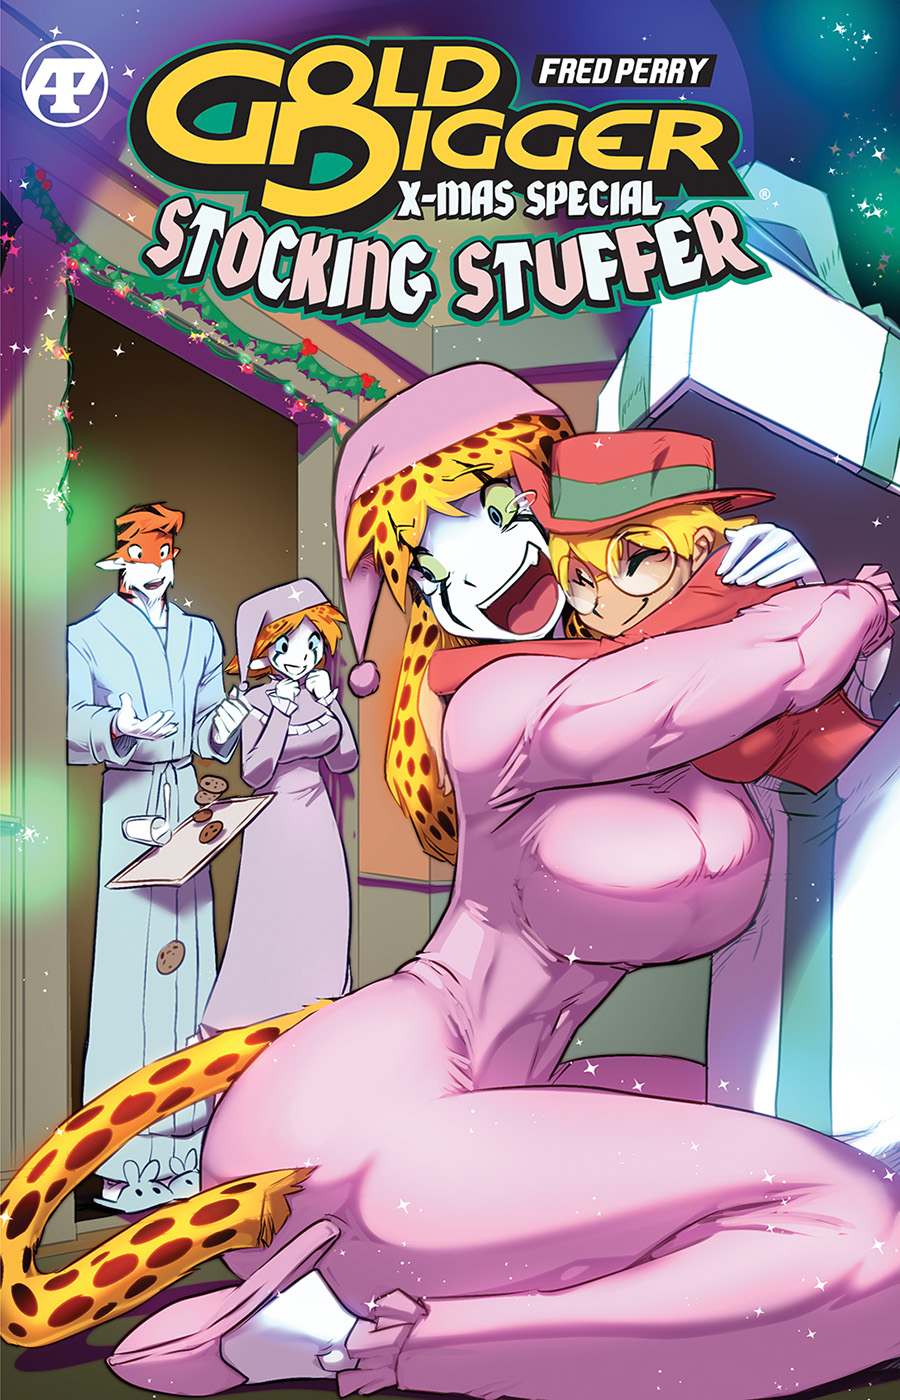 Gold Digger X-Mas Special Stocking Stuffer #1 (One Shot)